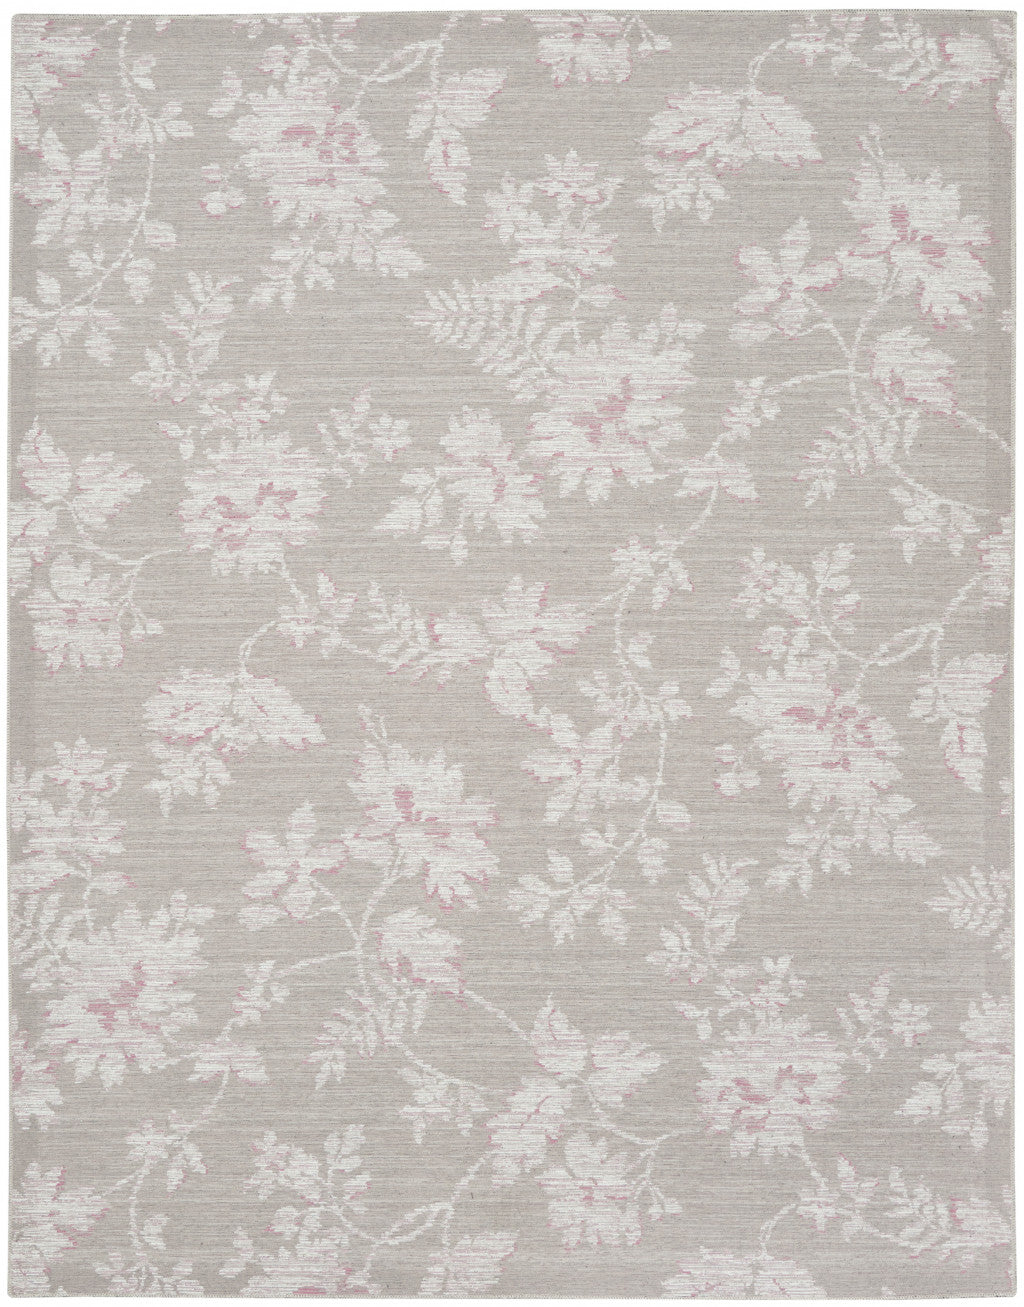 8' X 10' Natural Floral Distressed Washable Area Rug